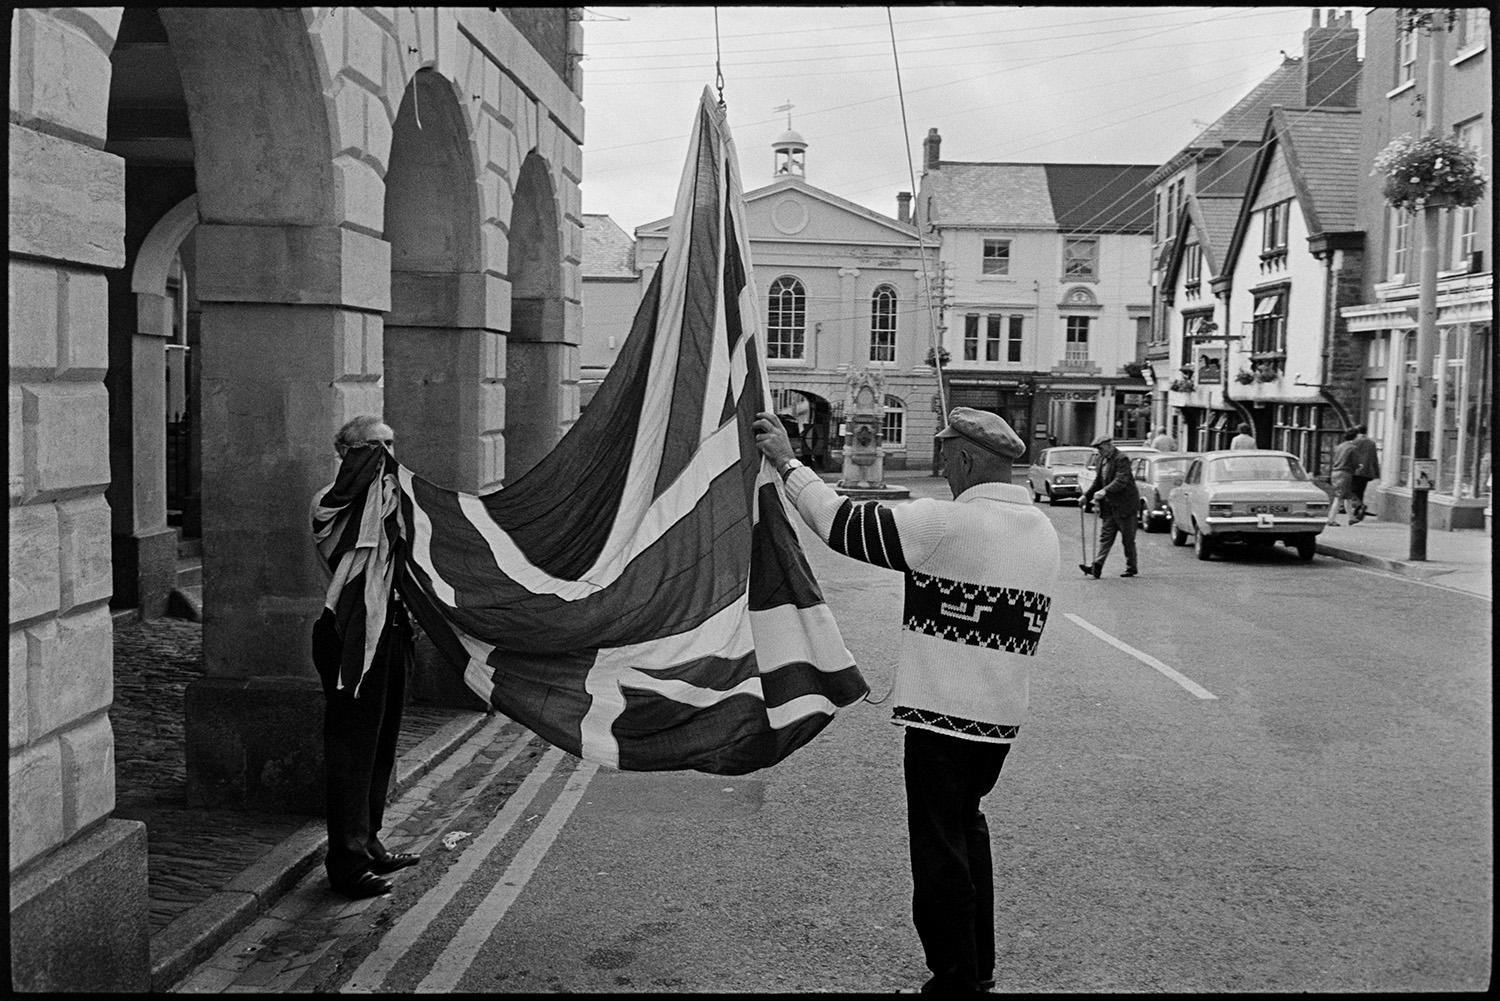 Men putting flag (Union Jack) up on Town Hall. 
[Mr Pointon and another man putting up or hoisting a Union Jack flag at the Town Hall in Torrington. Shop fronts, parked cars and shoppers can be seen in the background.]